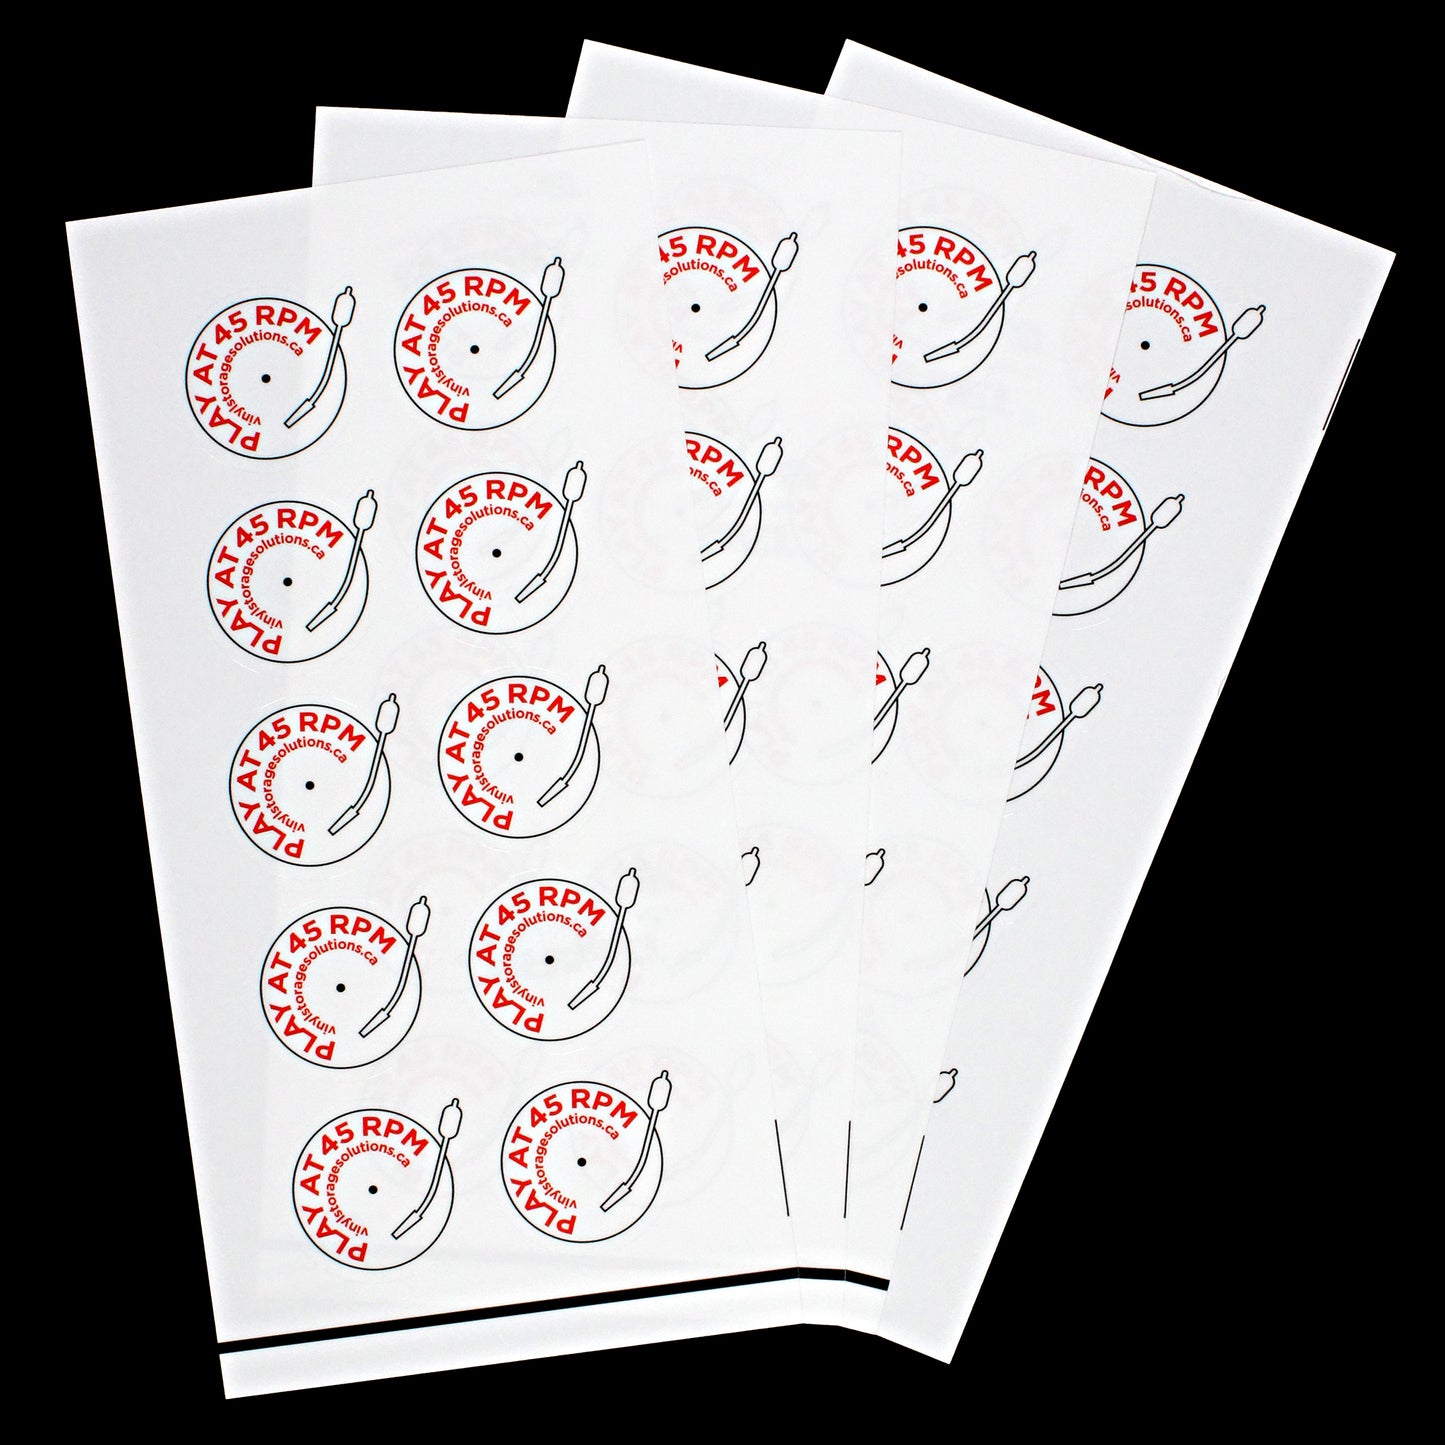 PLAY AT 45 RPM Stickers - Sheet of 10